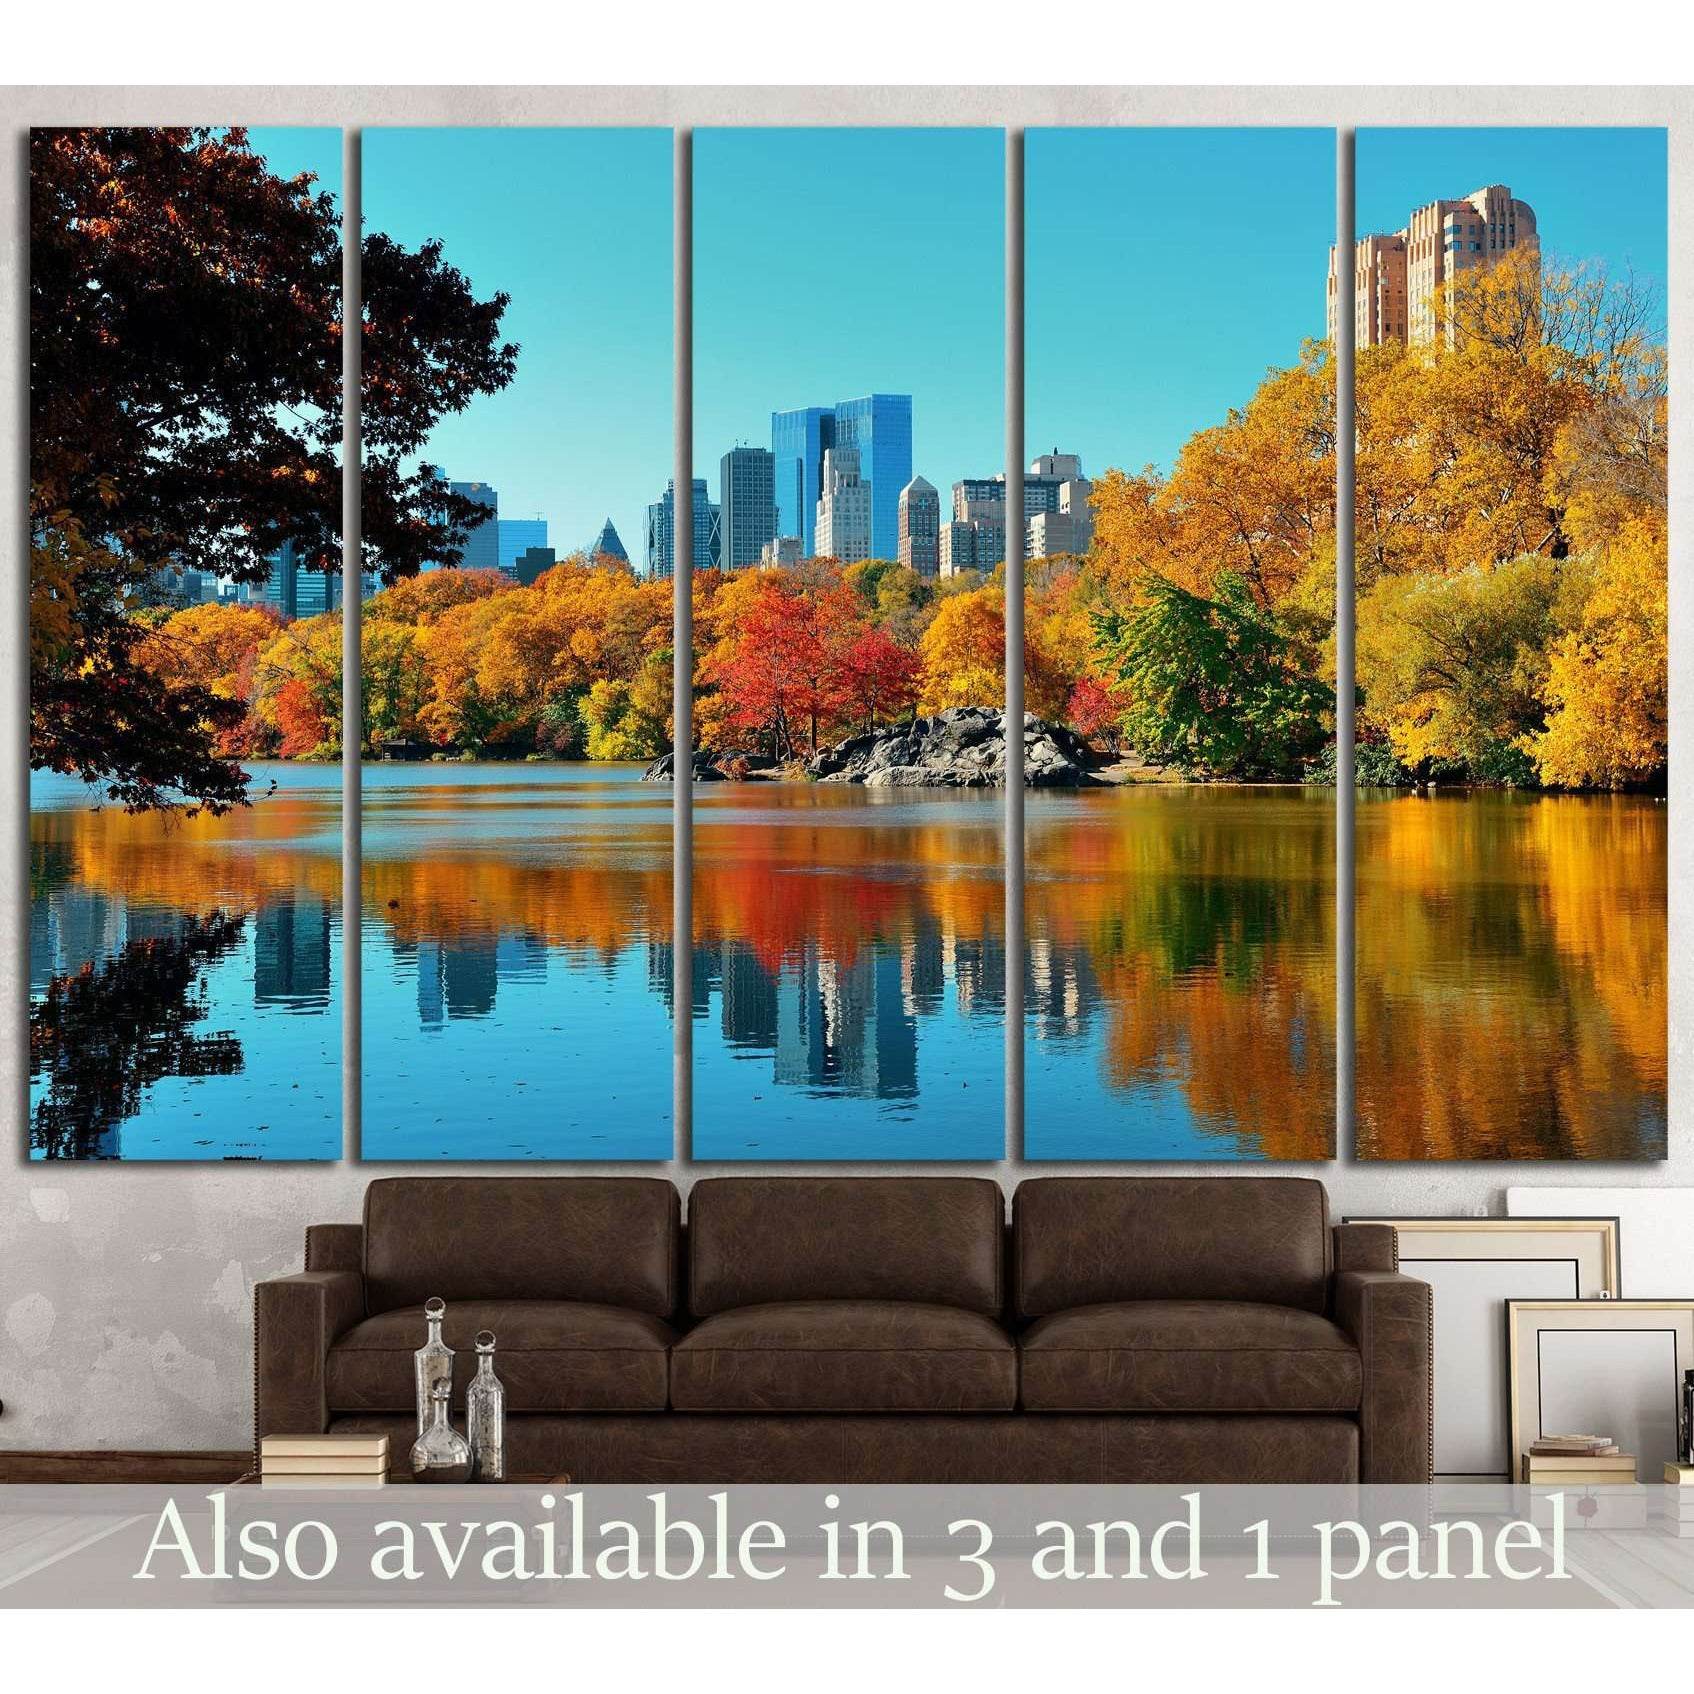 Central Park, New York №871 Ready to Hang Canvas Print